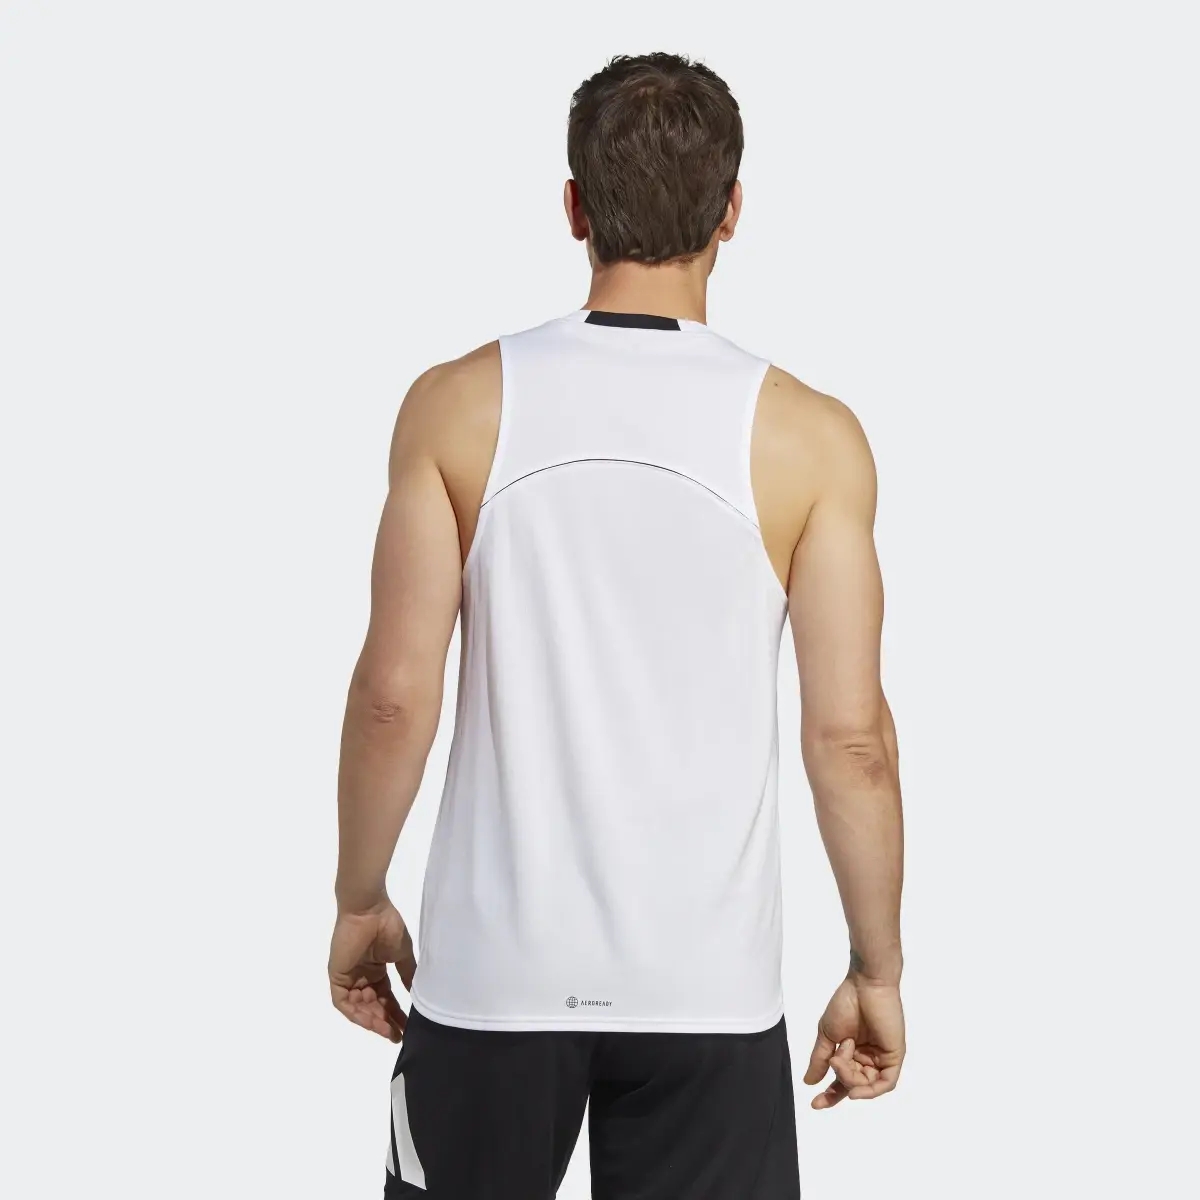 Adidas Designed for Movement HIIT Training Tank Top. 3